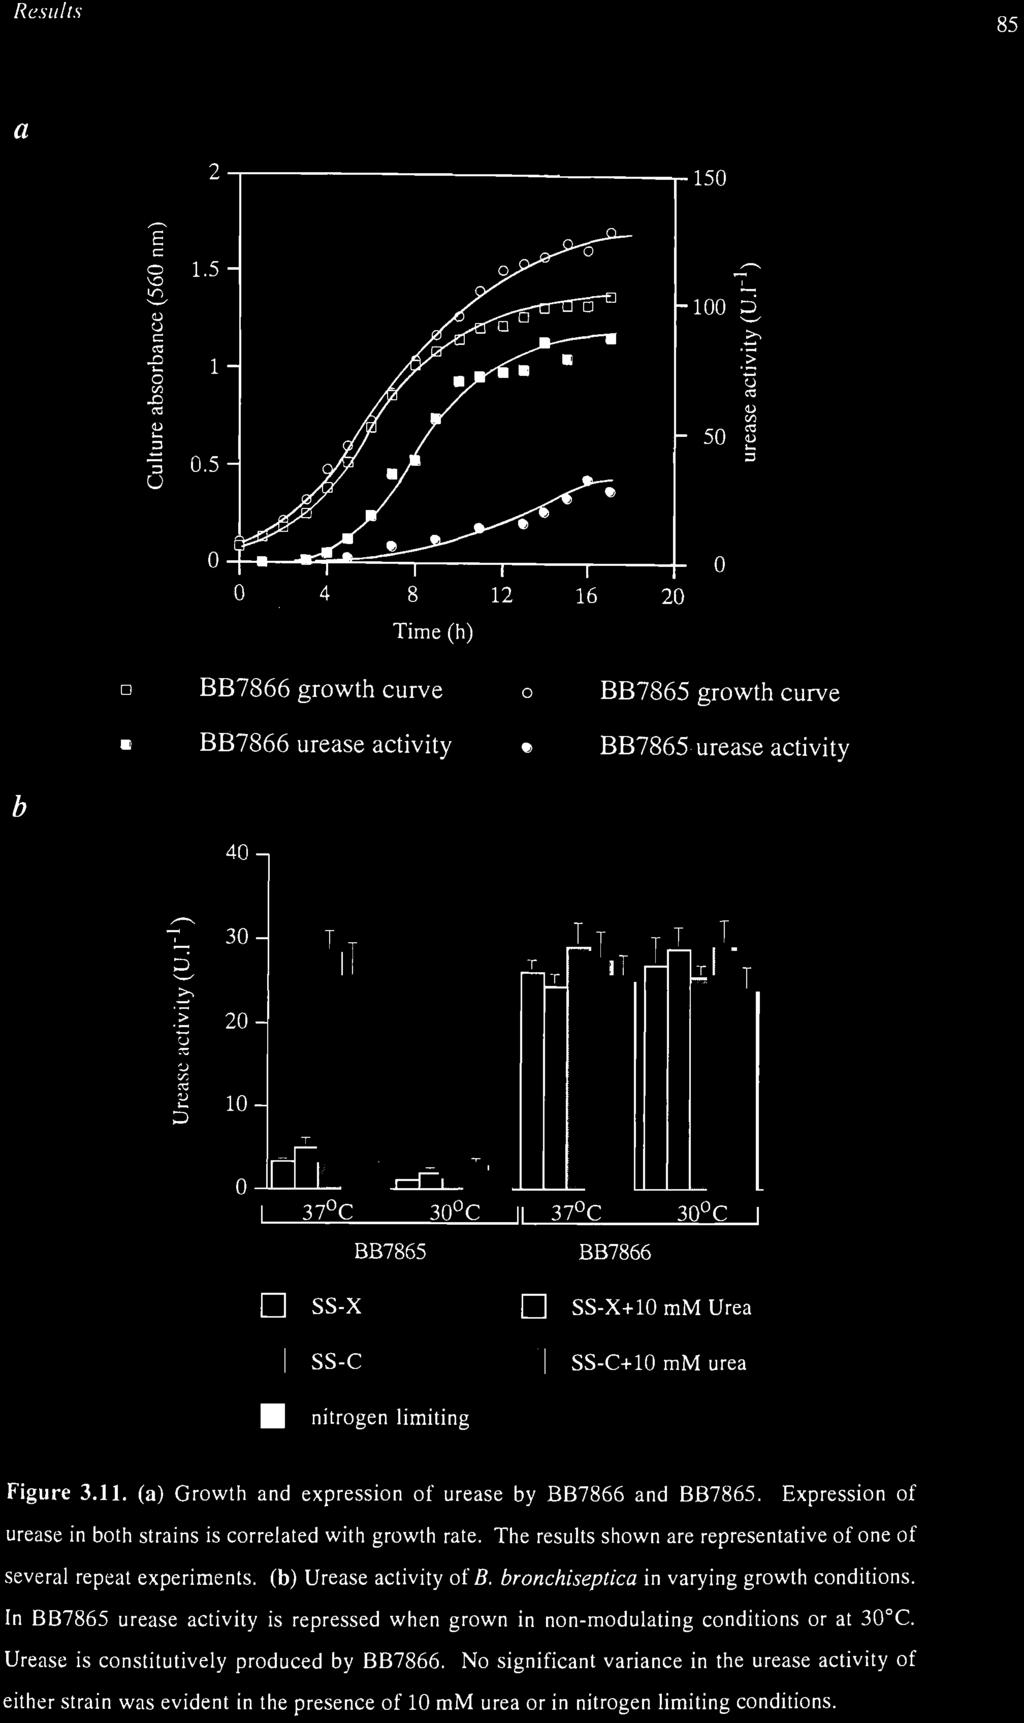 11. (a) Growth and expression of urease by BB7866 and BB7865. Expression of urease in both strains is correlated with growth rate.